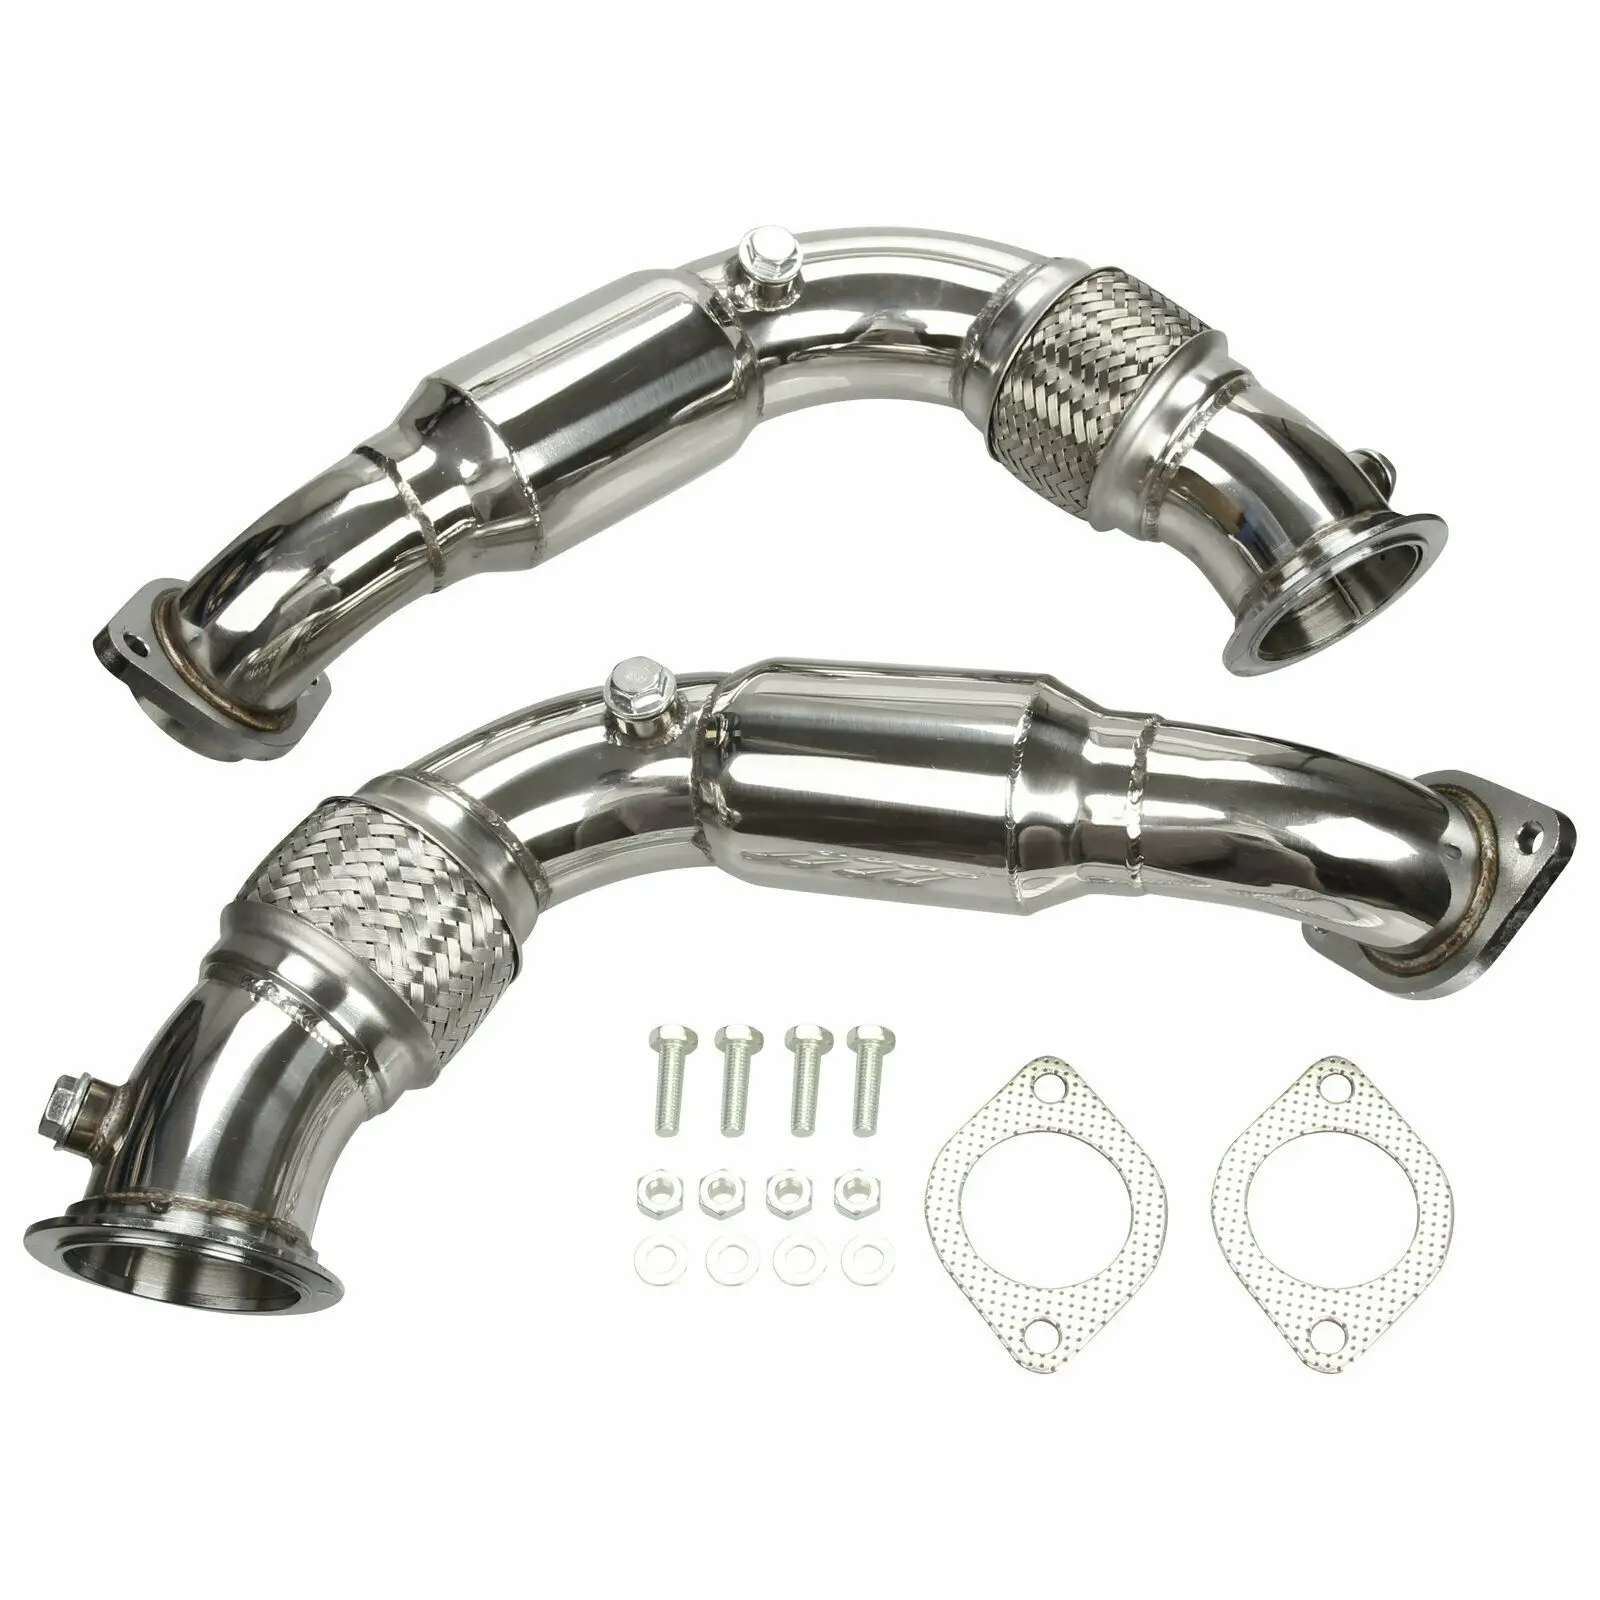 

Stainless Steel Exhaust Downpipe For 08-14 BMW X6/X5/5-/7-SERIES N63 B44 4.4 V8